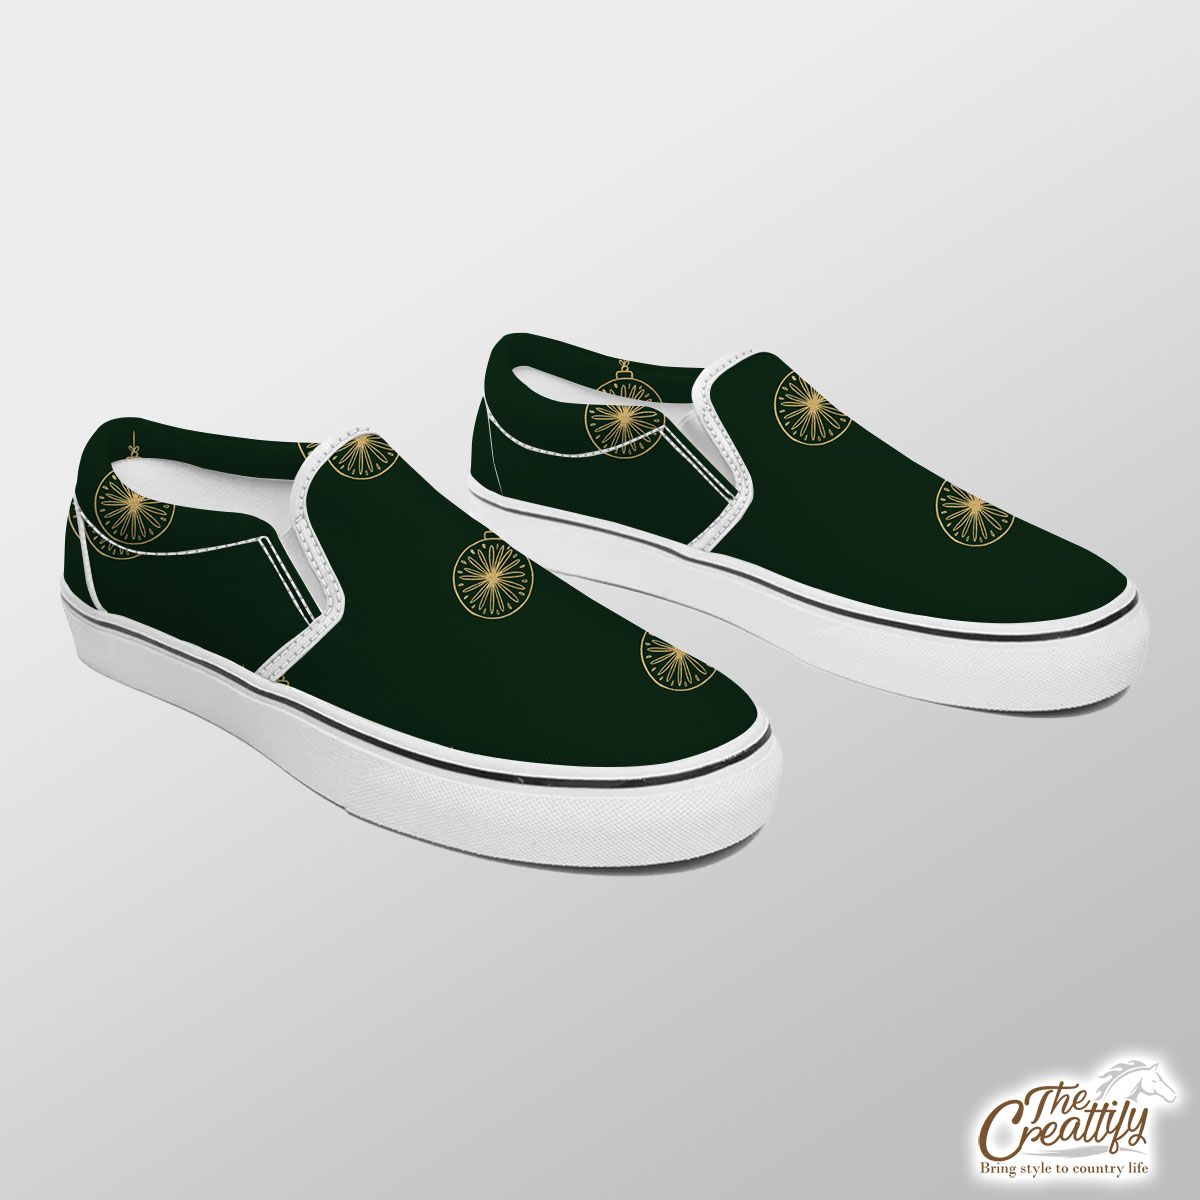 Gold And Green Christmas Ornament Slip On Sneakers